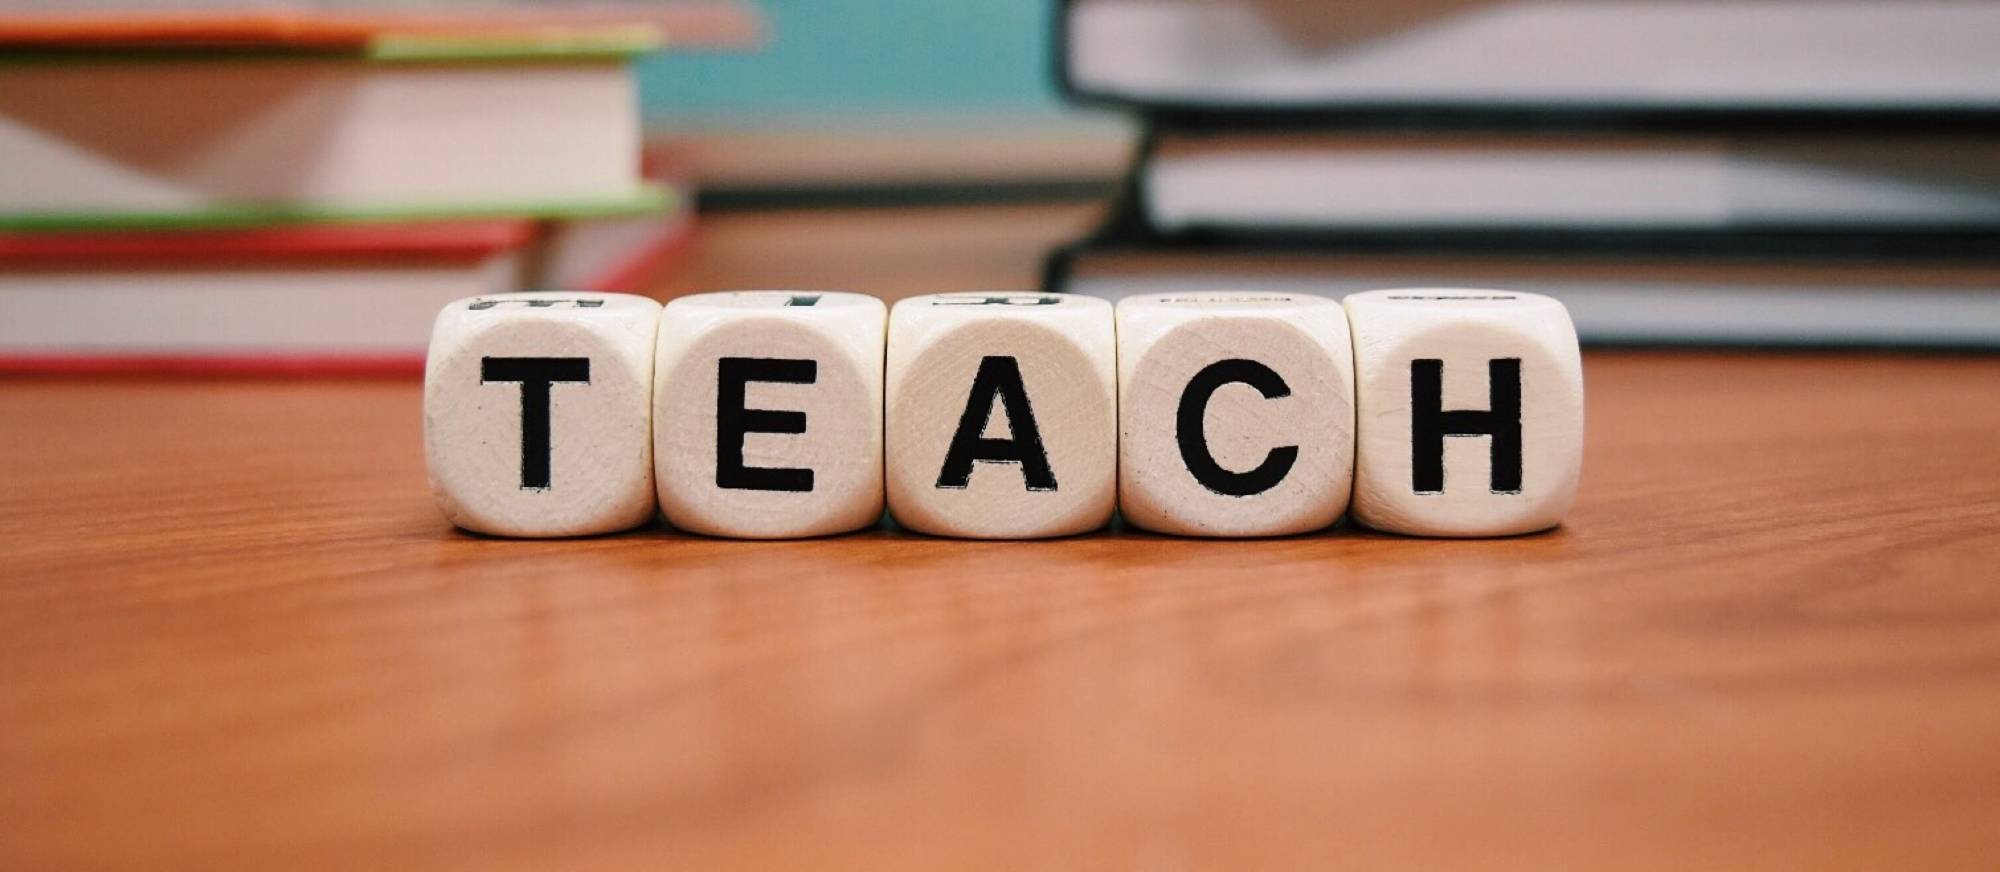 blocks spelling the word teach on a desk with books in the background